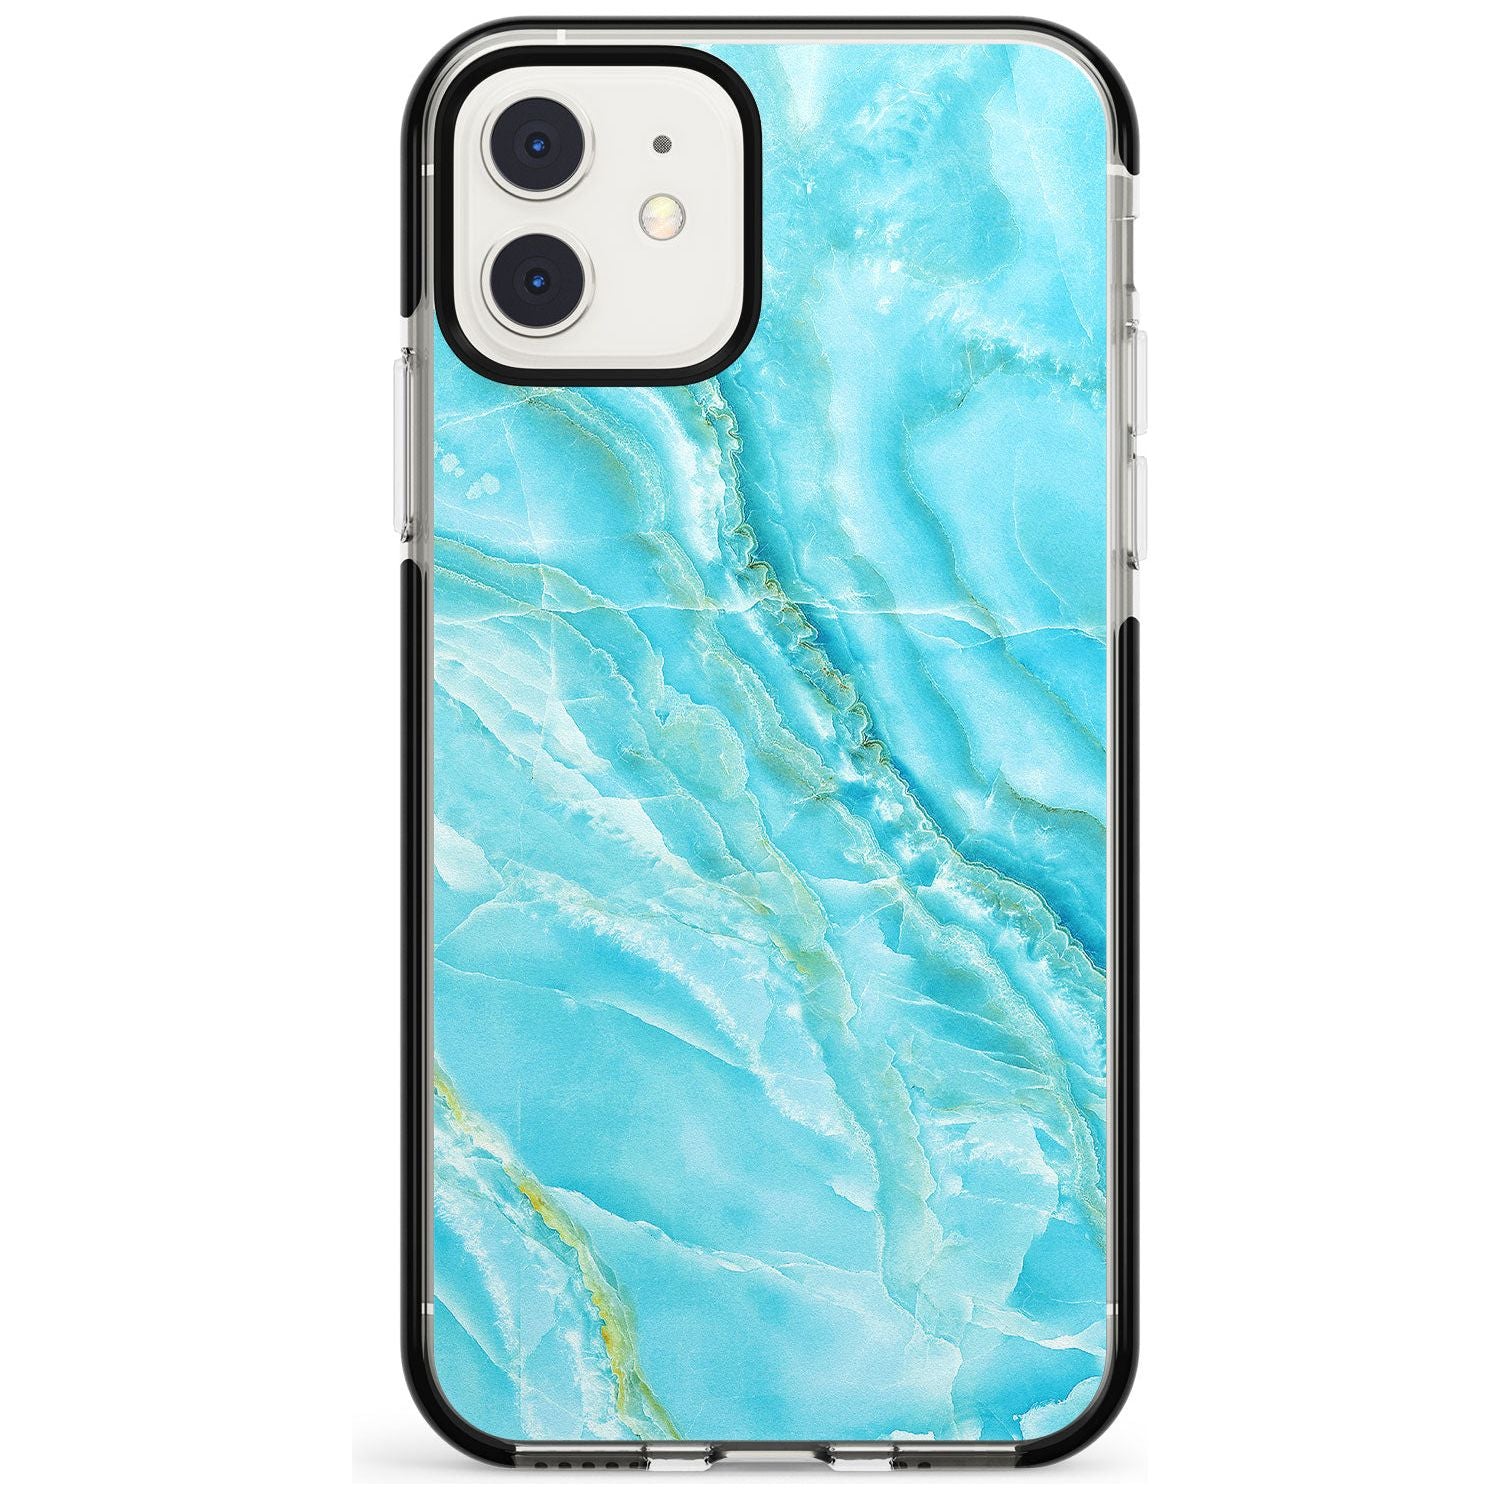 Bright Blue Onyx Marble Texture Pink Fade Impact Phone Case for iPhone 11 Pro Max